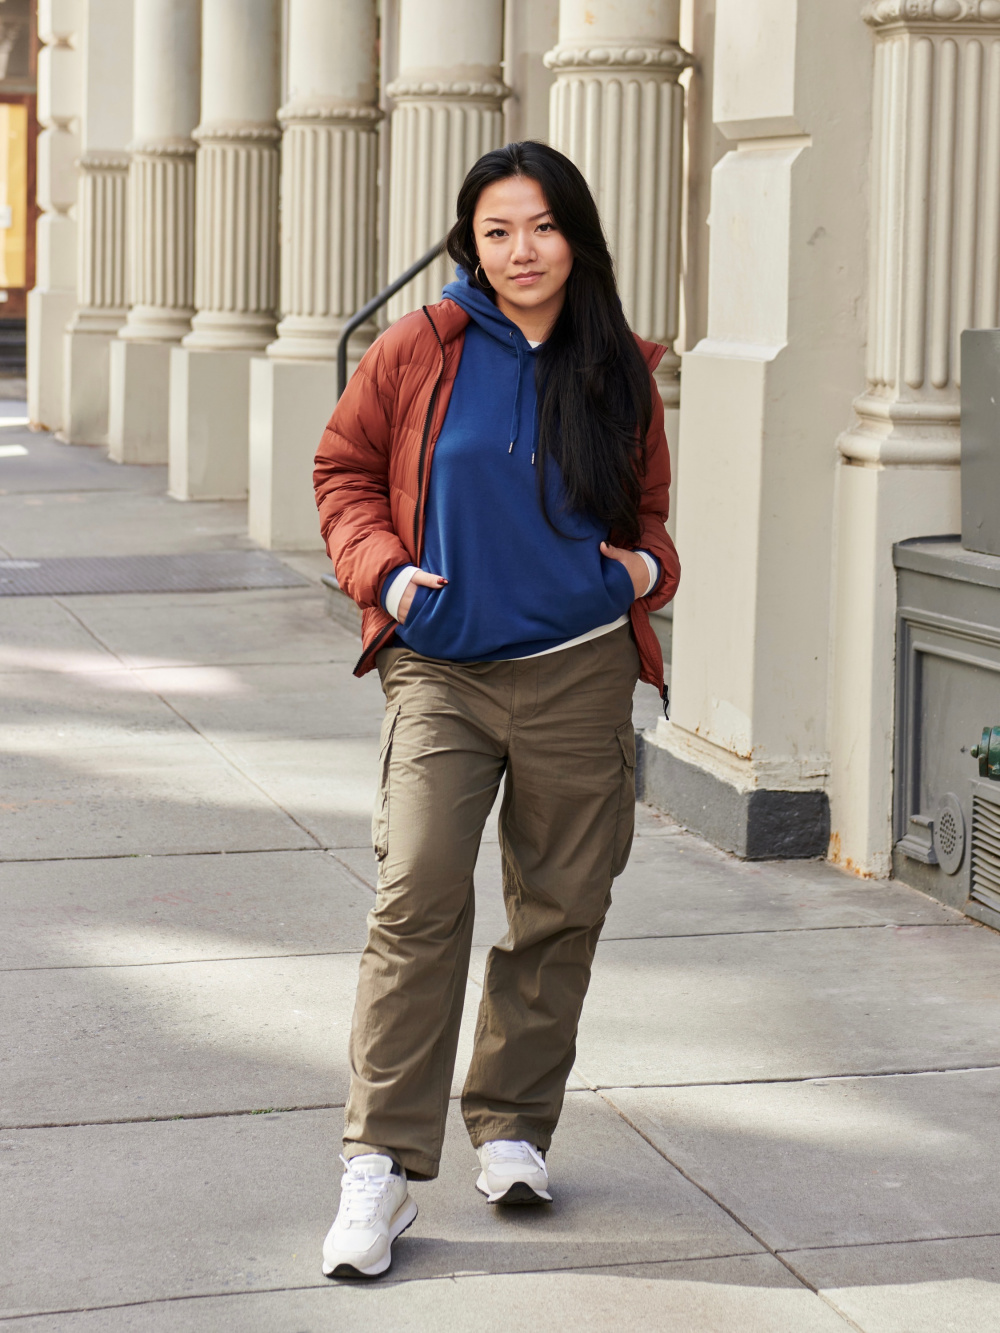 Check styling ideas for「HEATTECH Warm-Lined Pants」